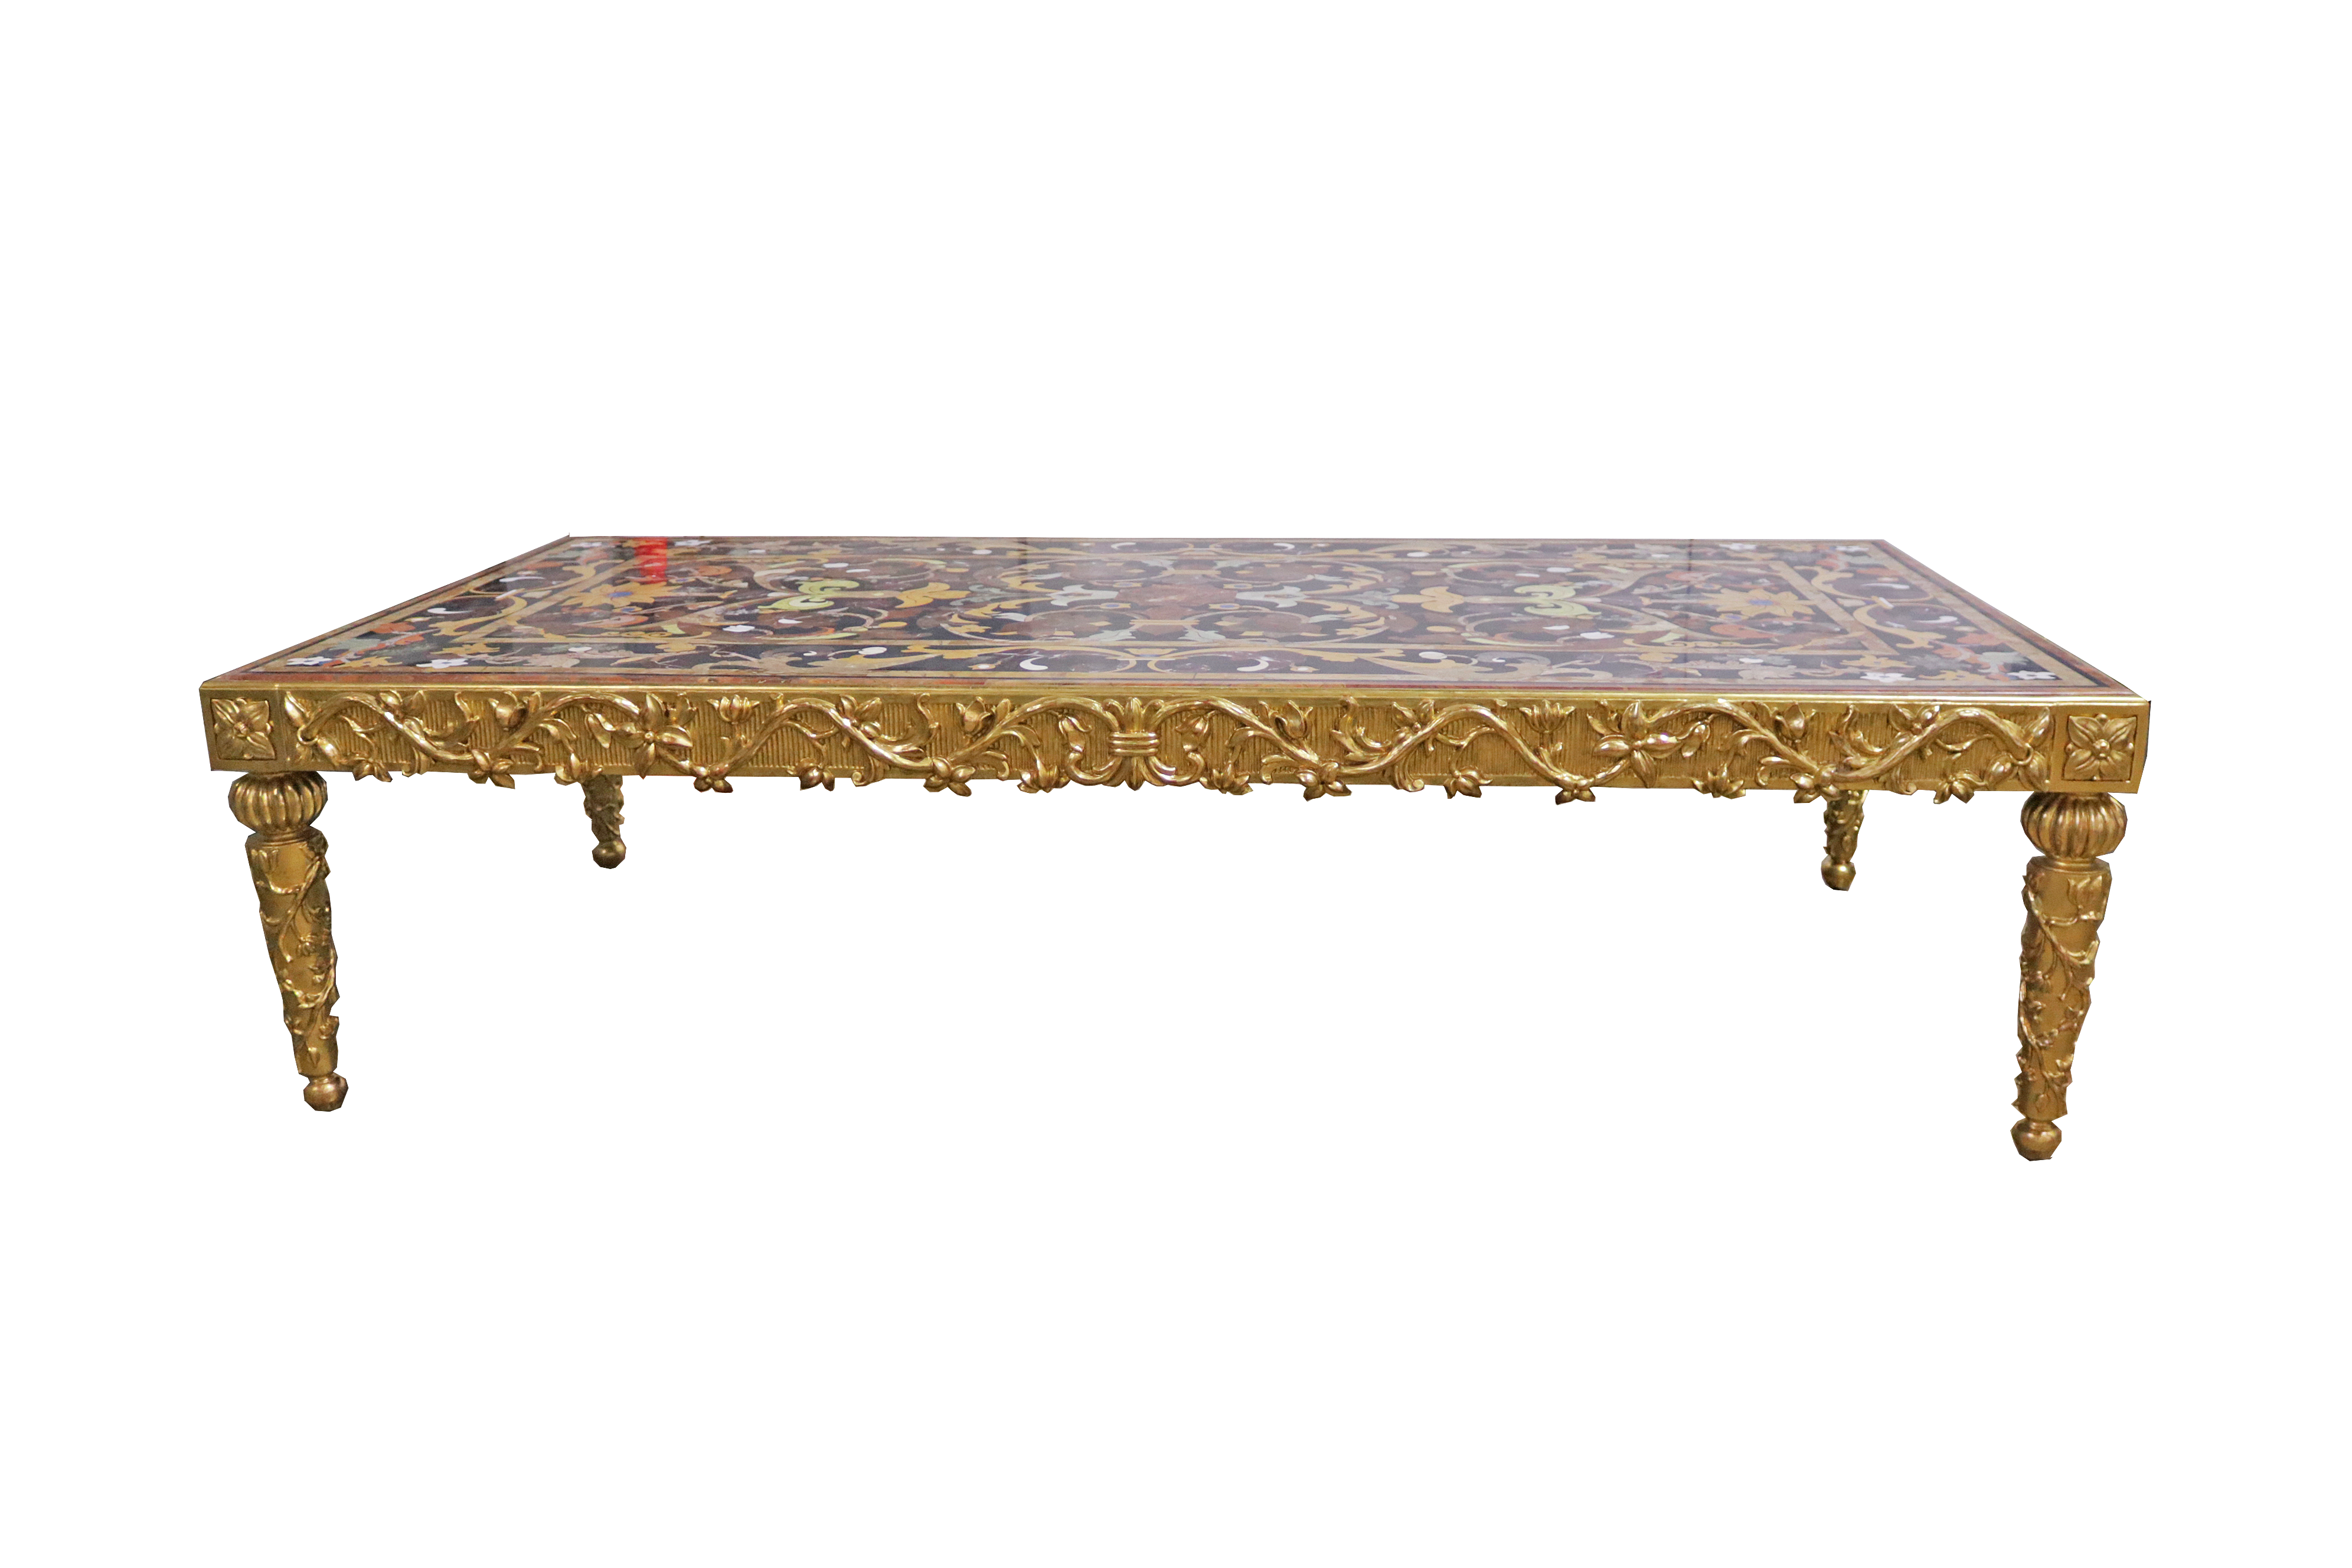 An Italian Pietra Dura Marble Coffee Table Top on a Later 22 Karat Gilded Wooden Base, No. 4846